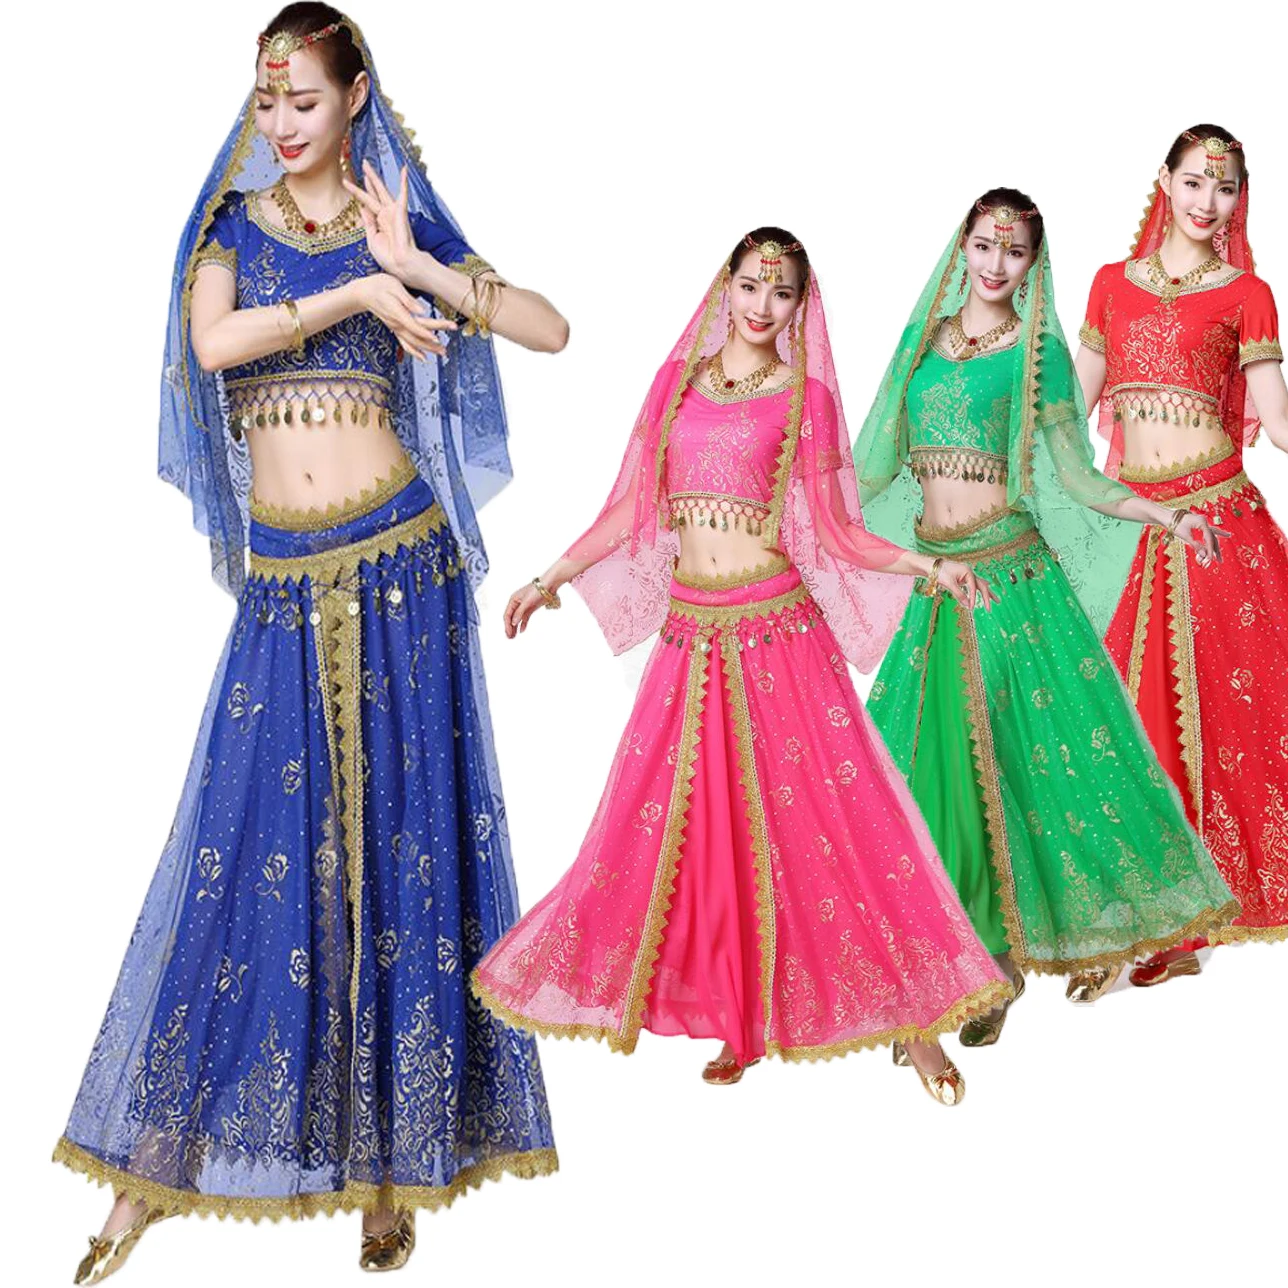 

2019 Hot Sale Women Belly Dance Performance Costume Bollywood Dress exercise Outfit Set, Red;dark blue;green and fushia